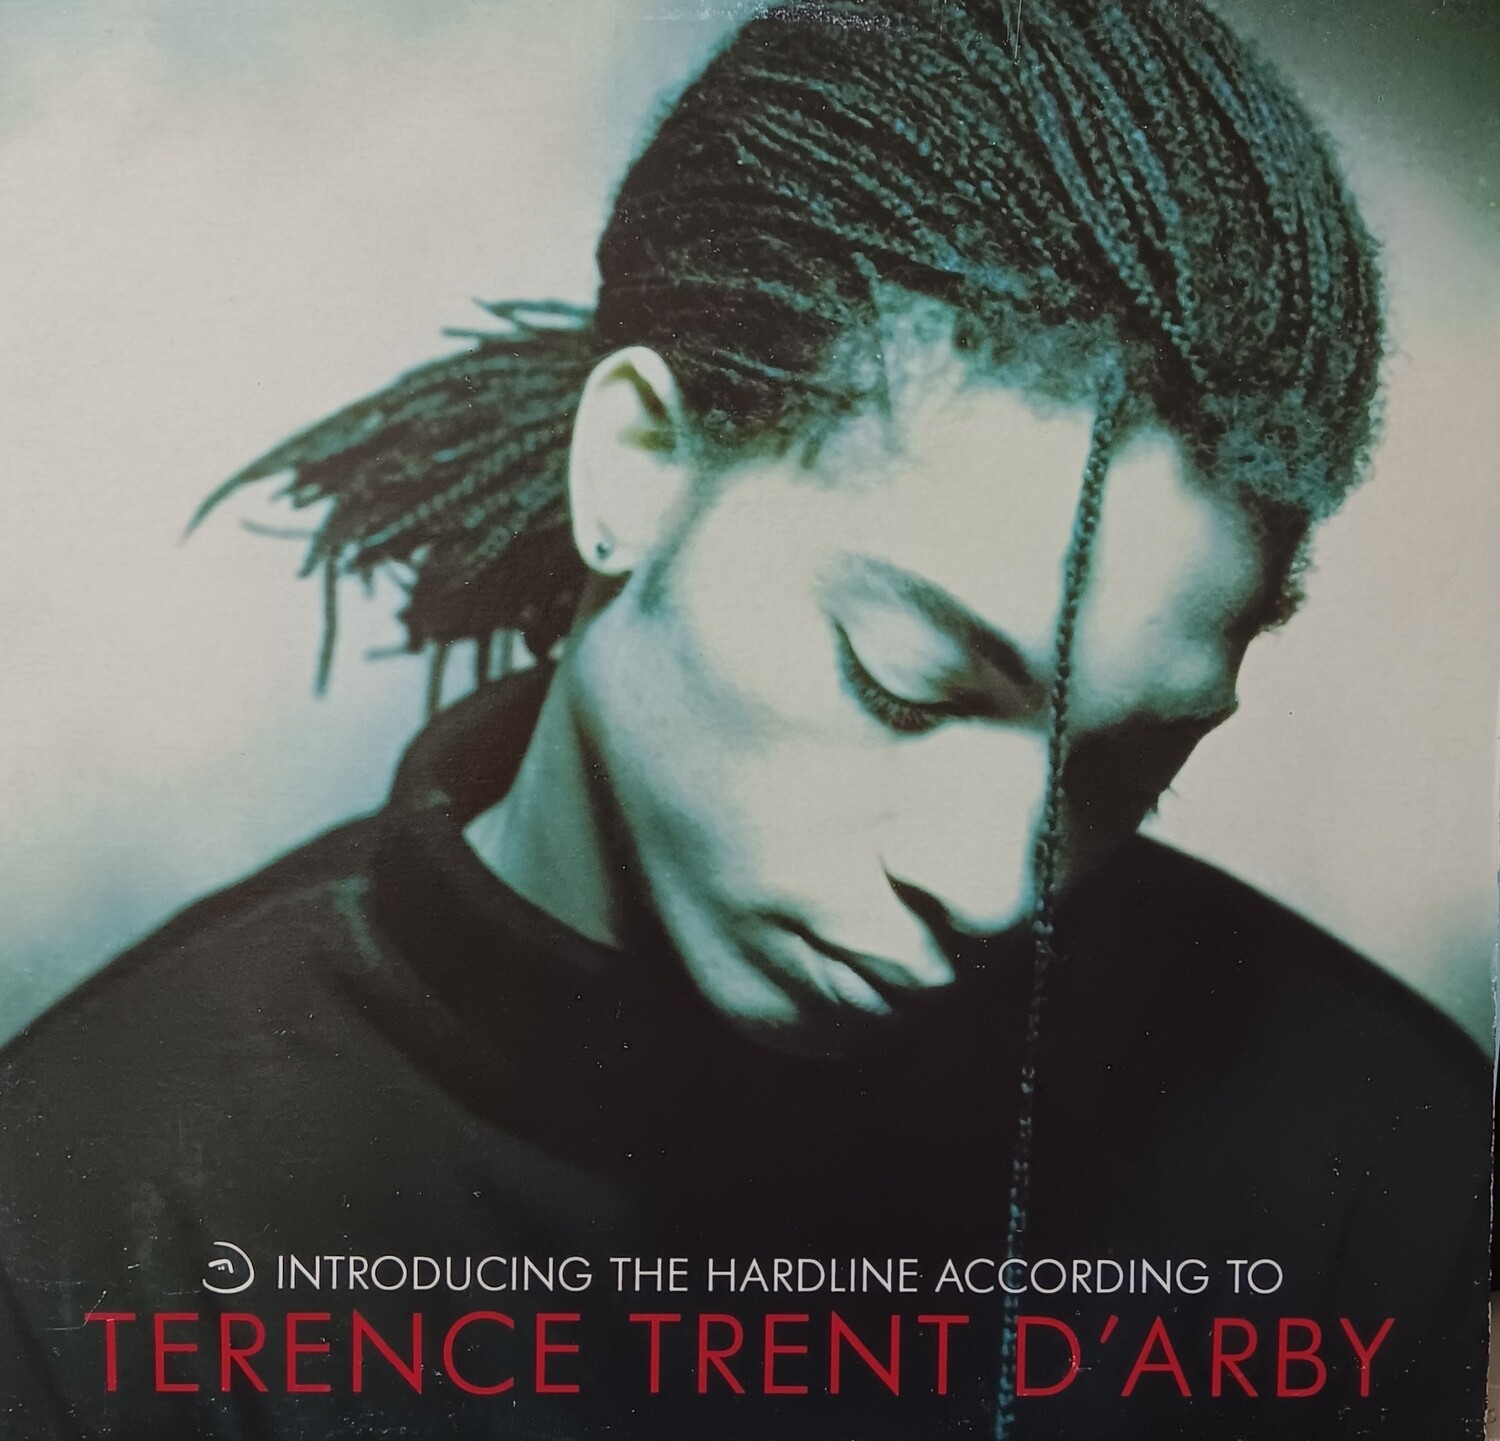 TERENCE TRENT D'ARBY - Introducing The hardline